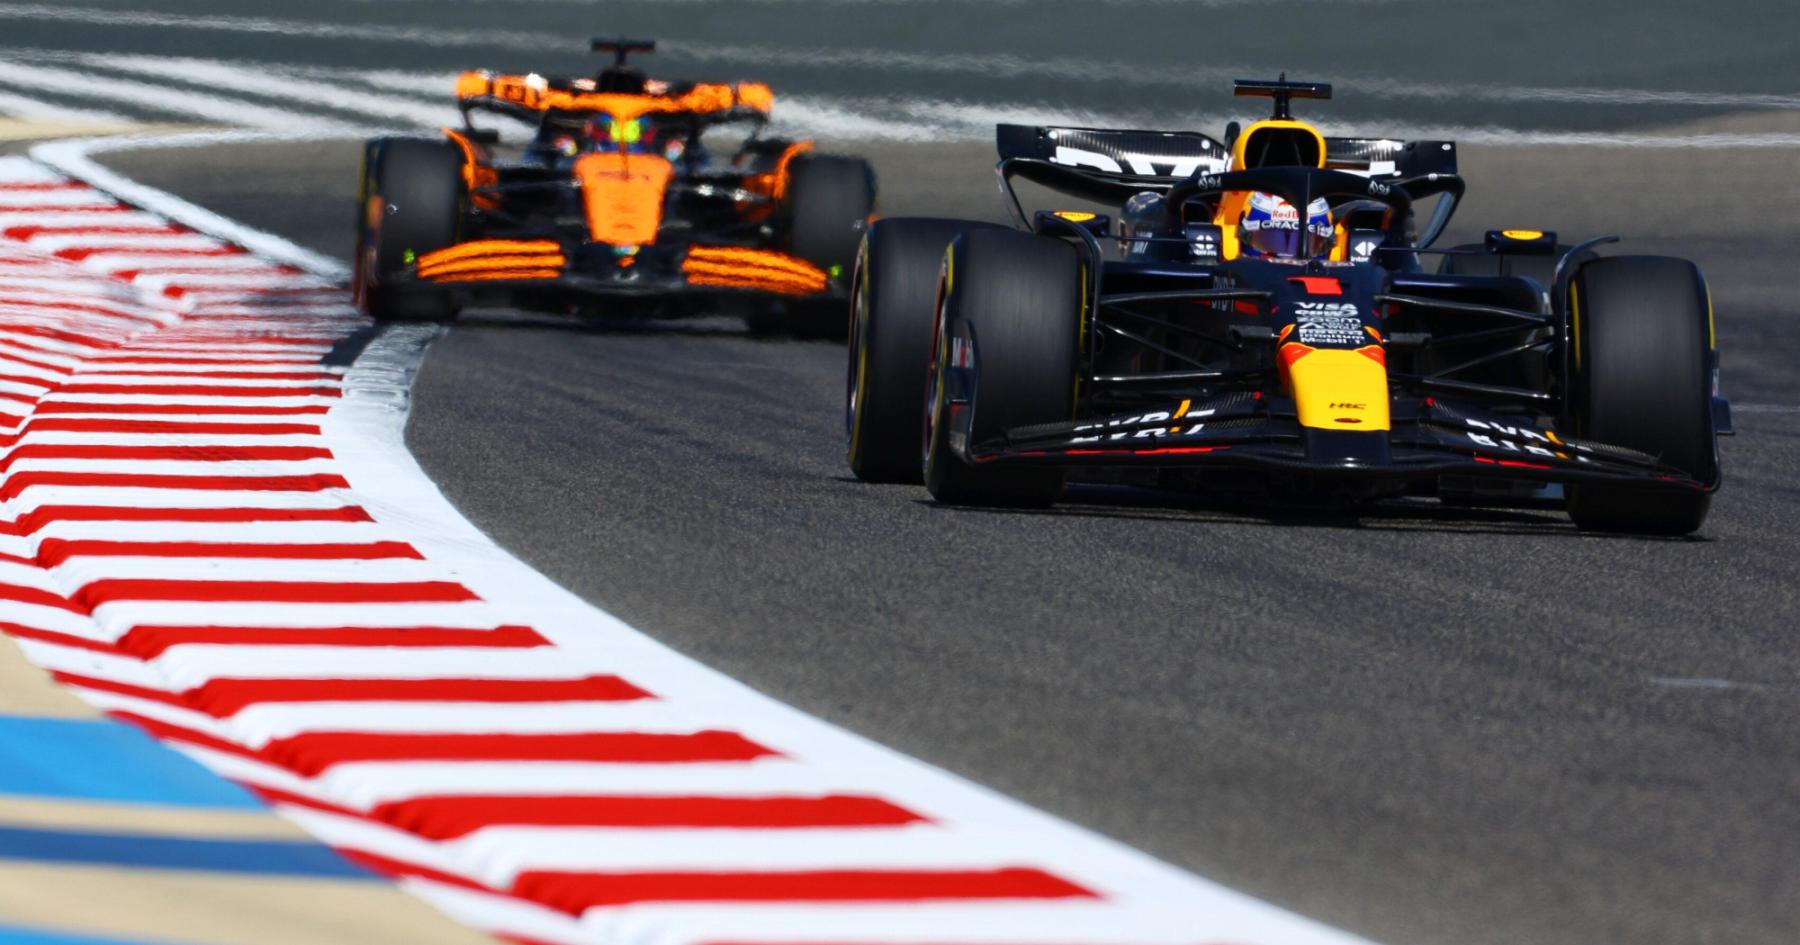 McLaren boss explains ‘wow’ moment about ‘brave’ Red Bull